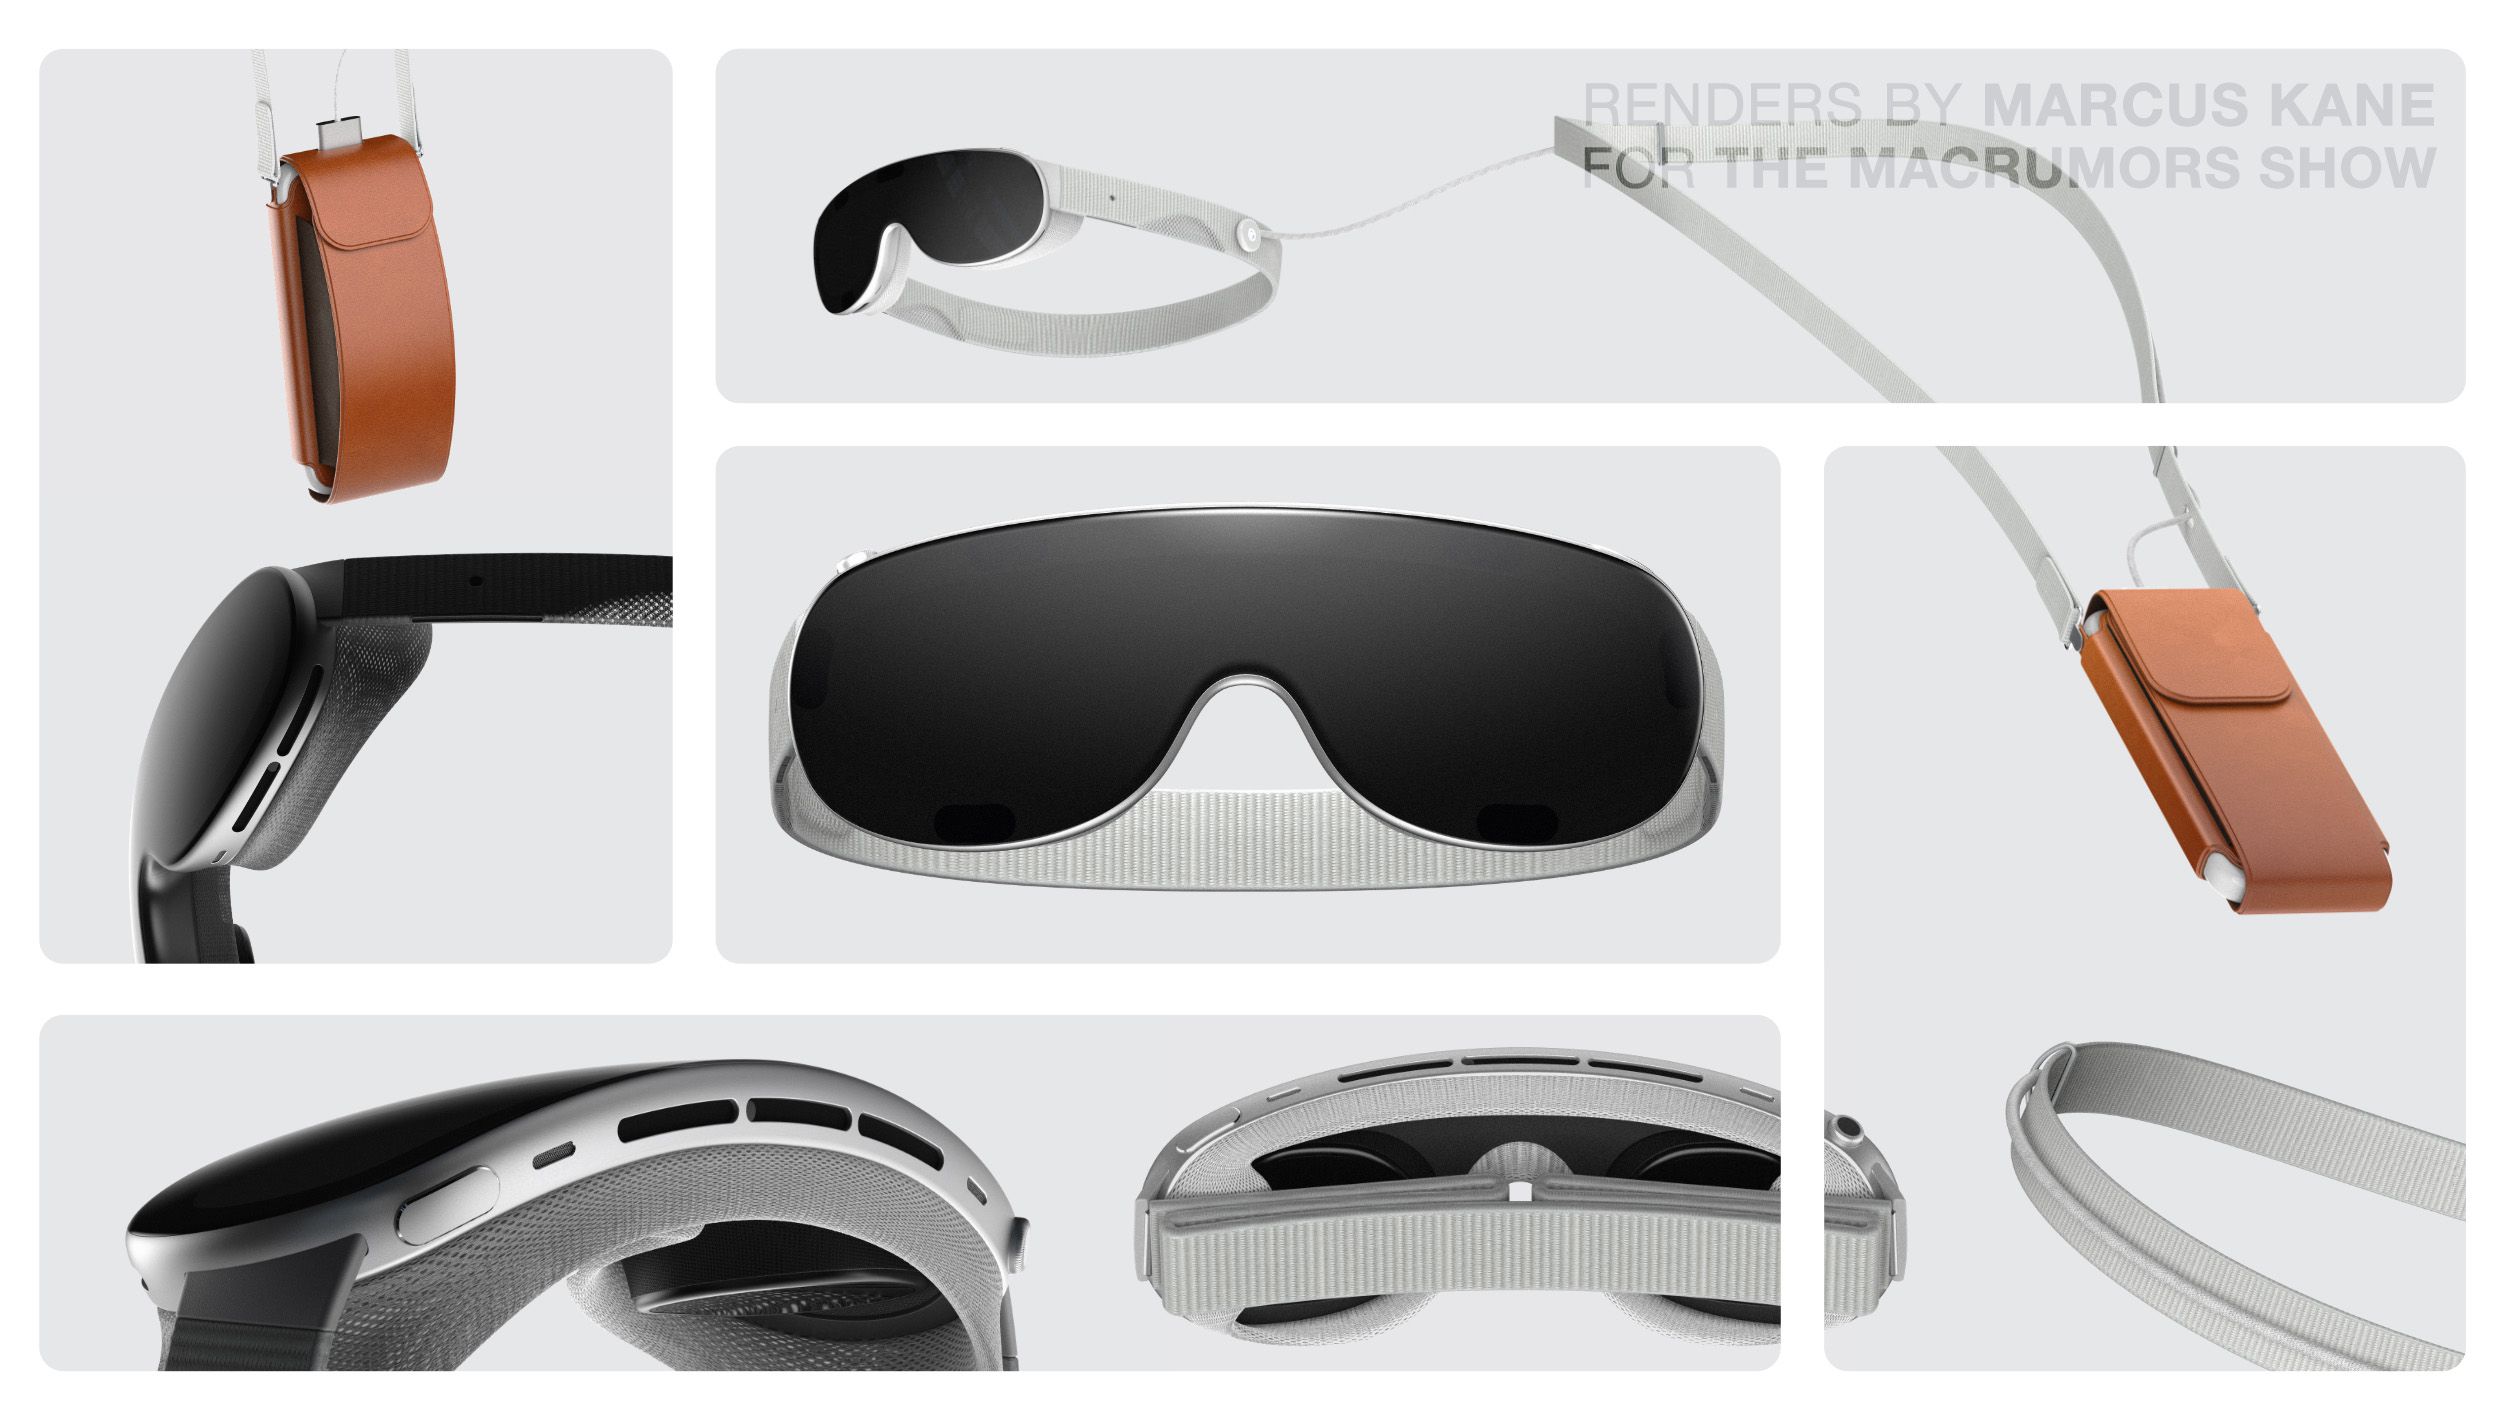 The MacRumors Show: Product Designer Marcus Kane Envisions What Apple's AR/VR Headset Could Look Like - macrumors.com